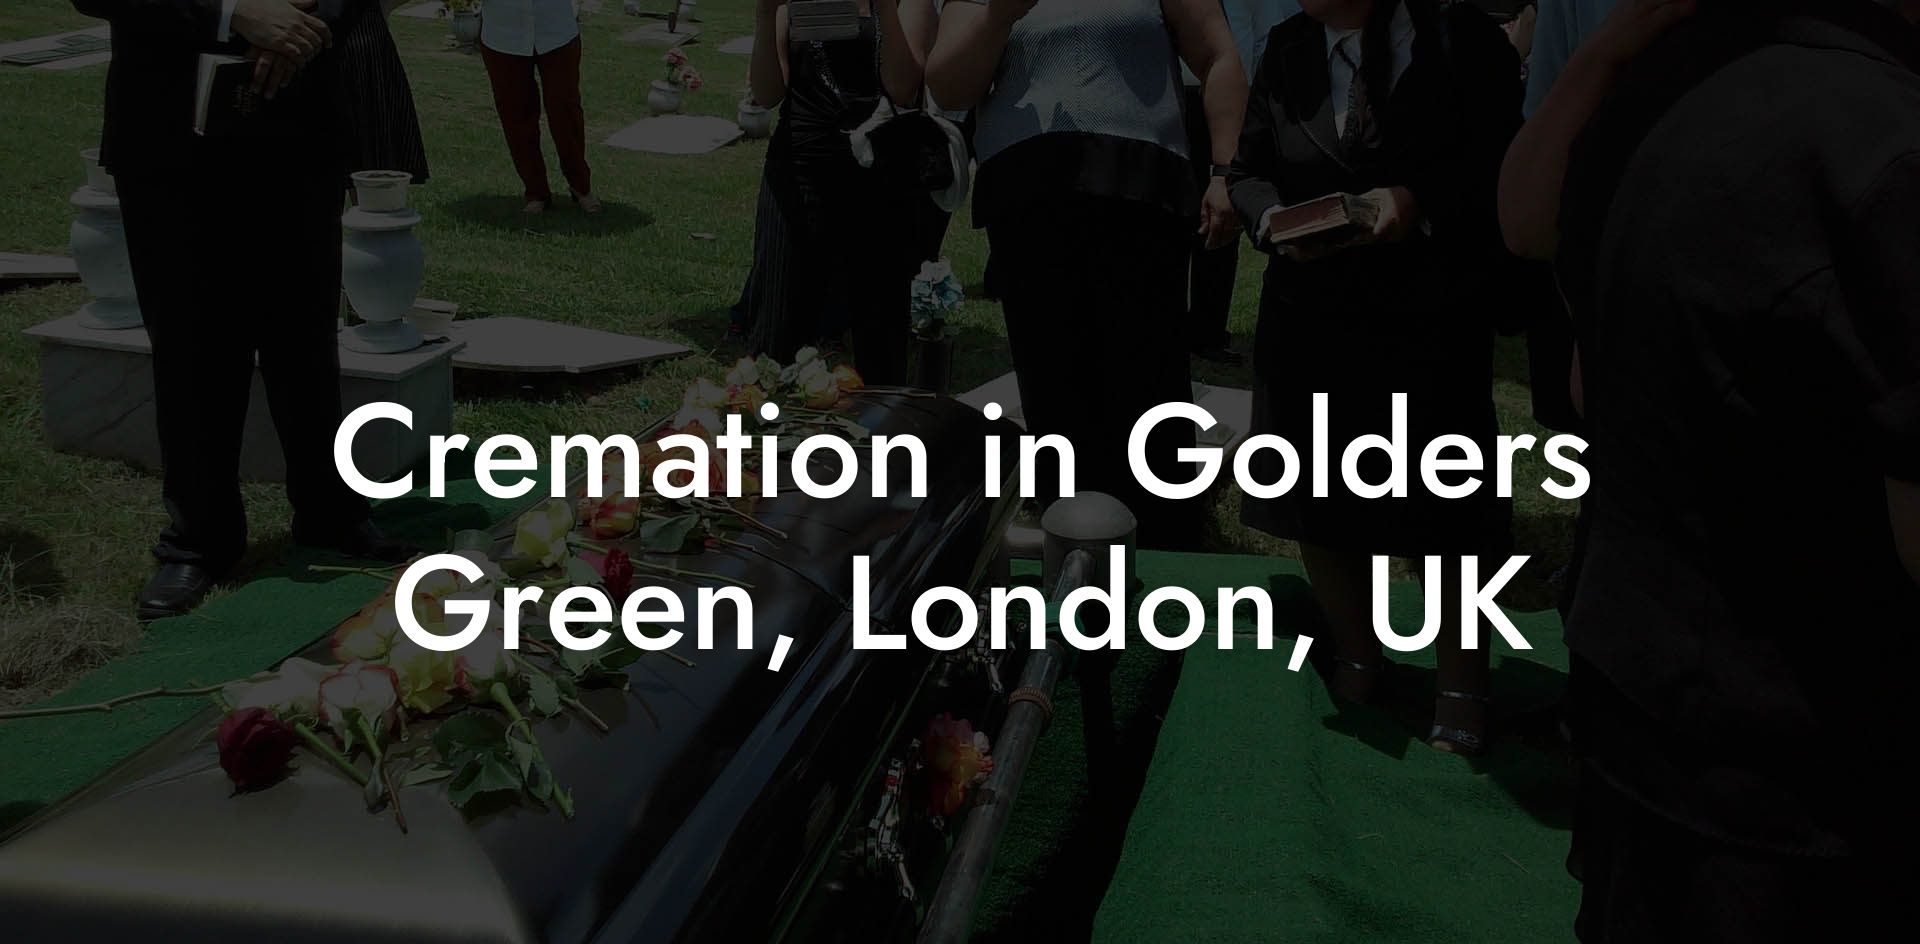 Cremation in Golders Green, London, UK